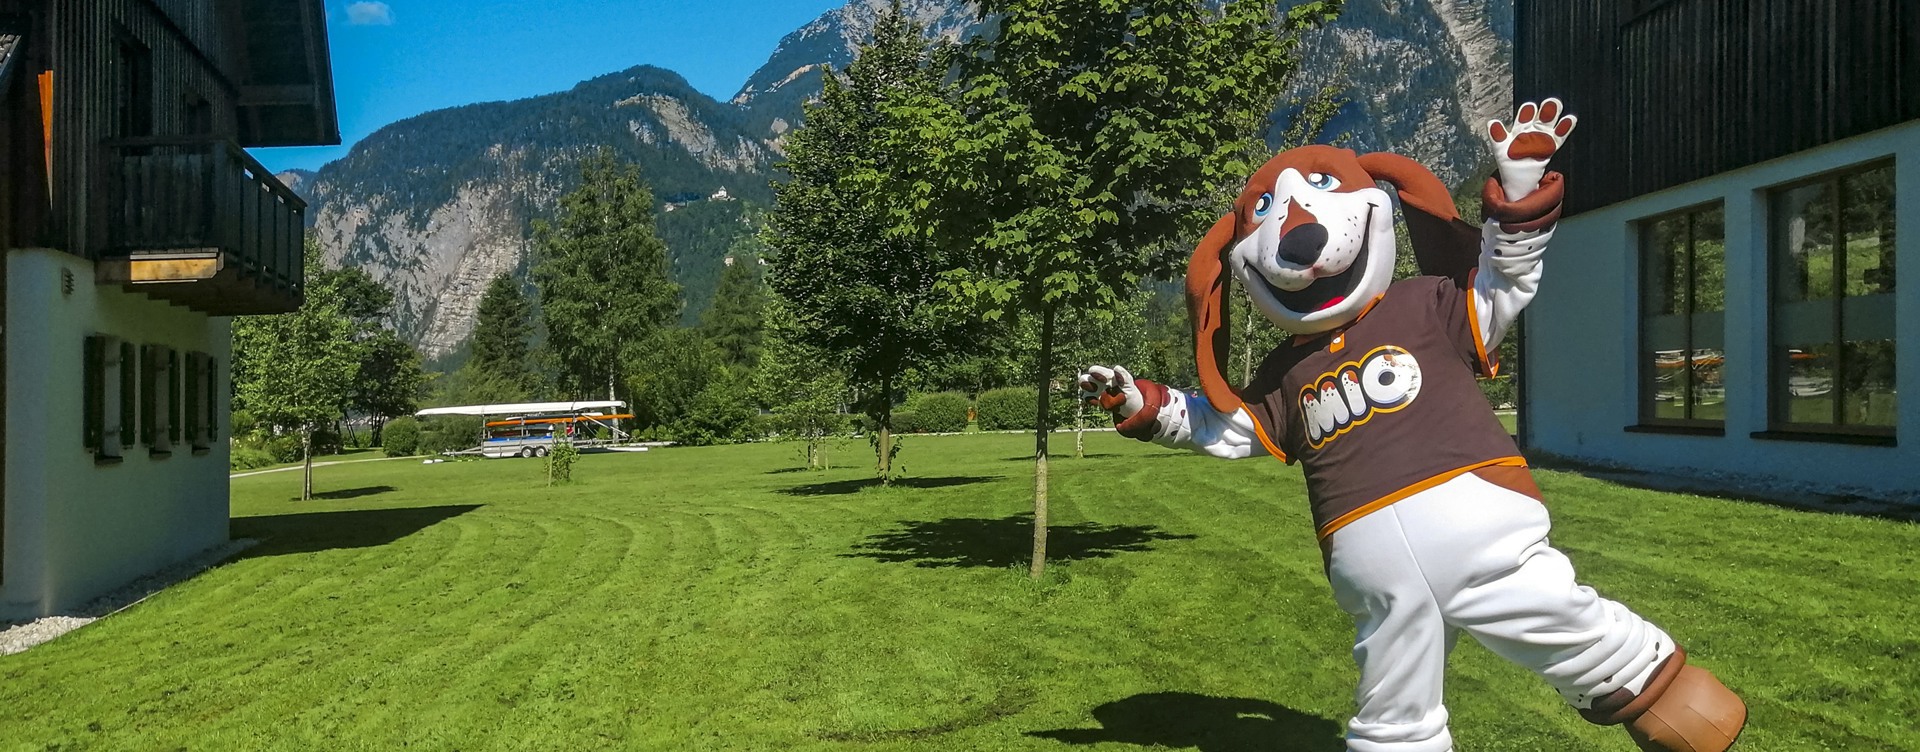 Have an unforgettable summer holiday in Obertraun 
at the Mio Kids Club